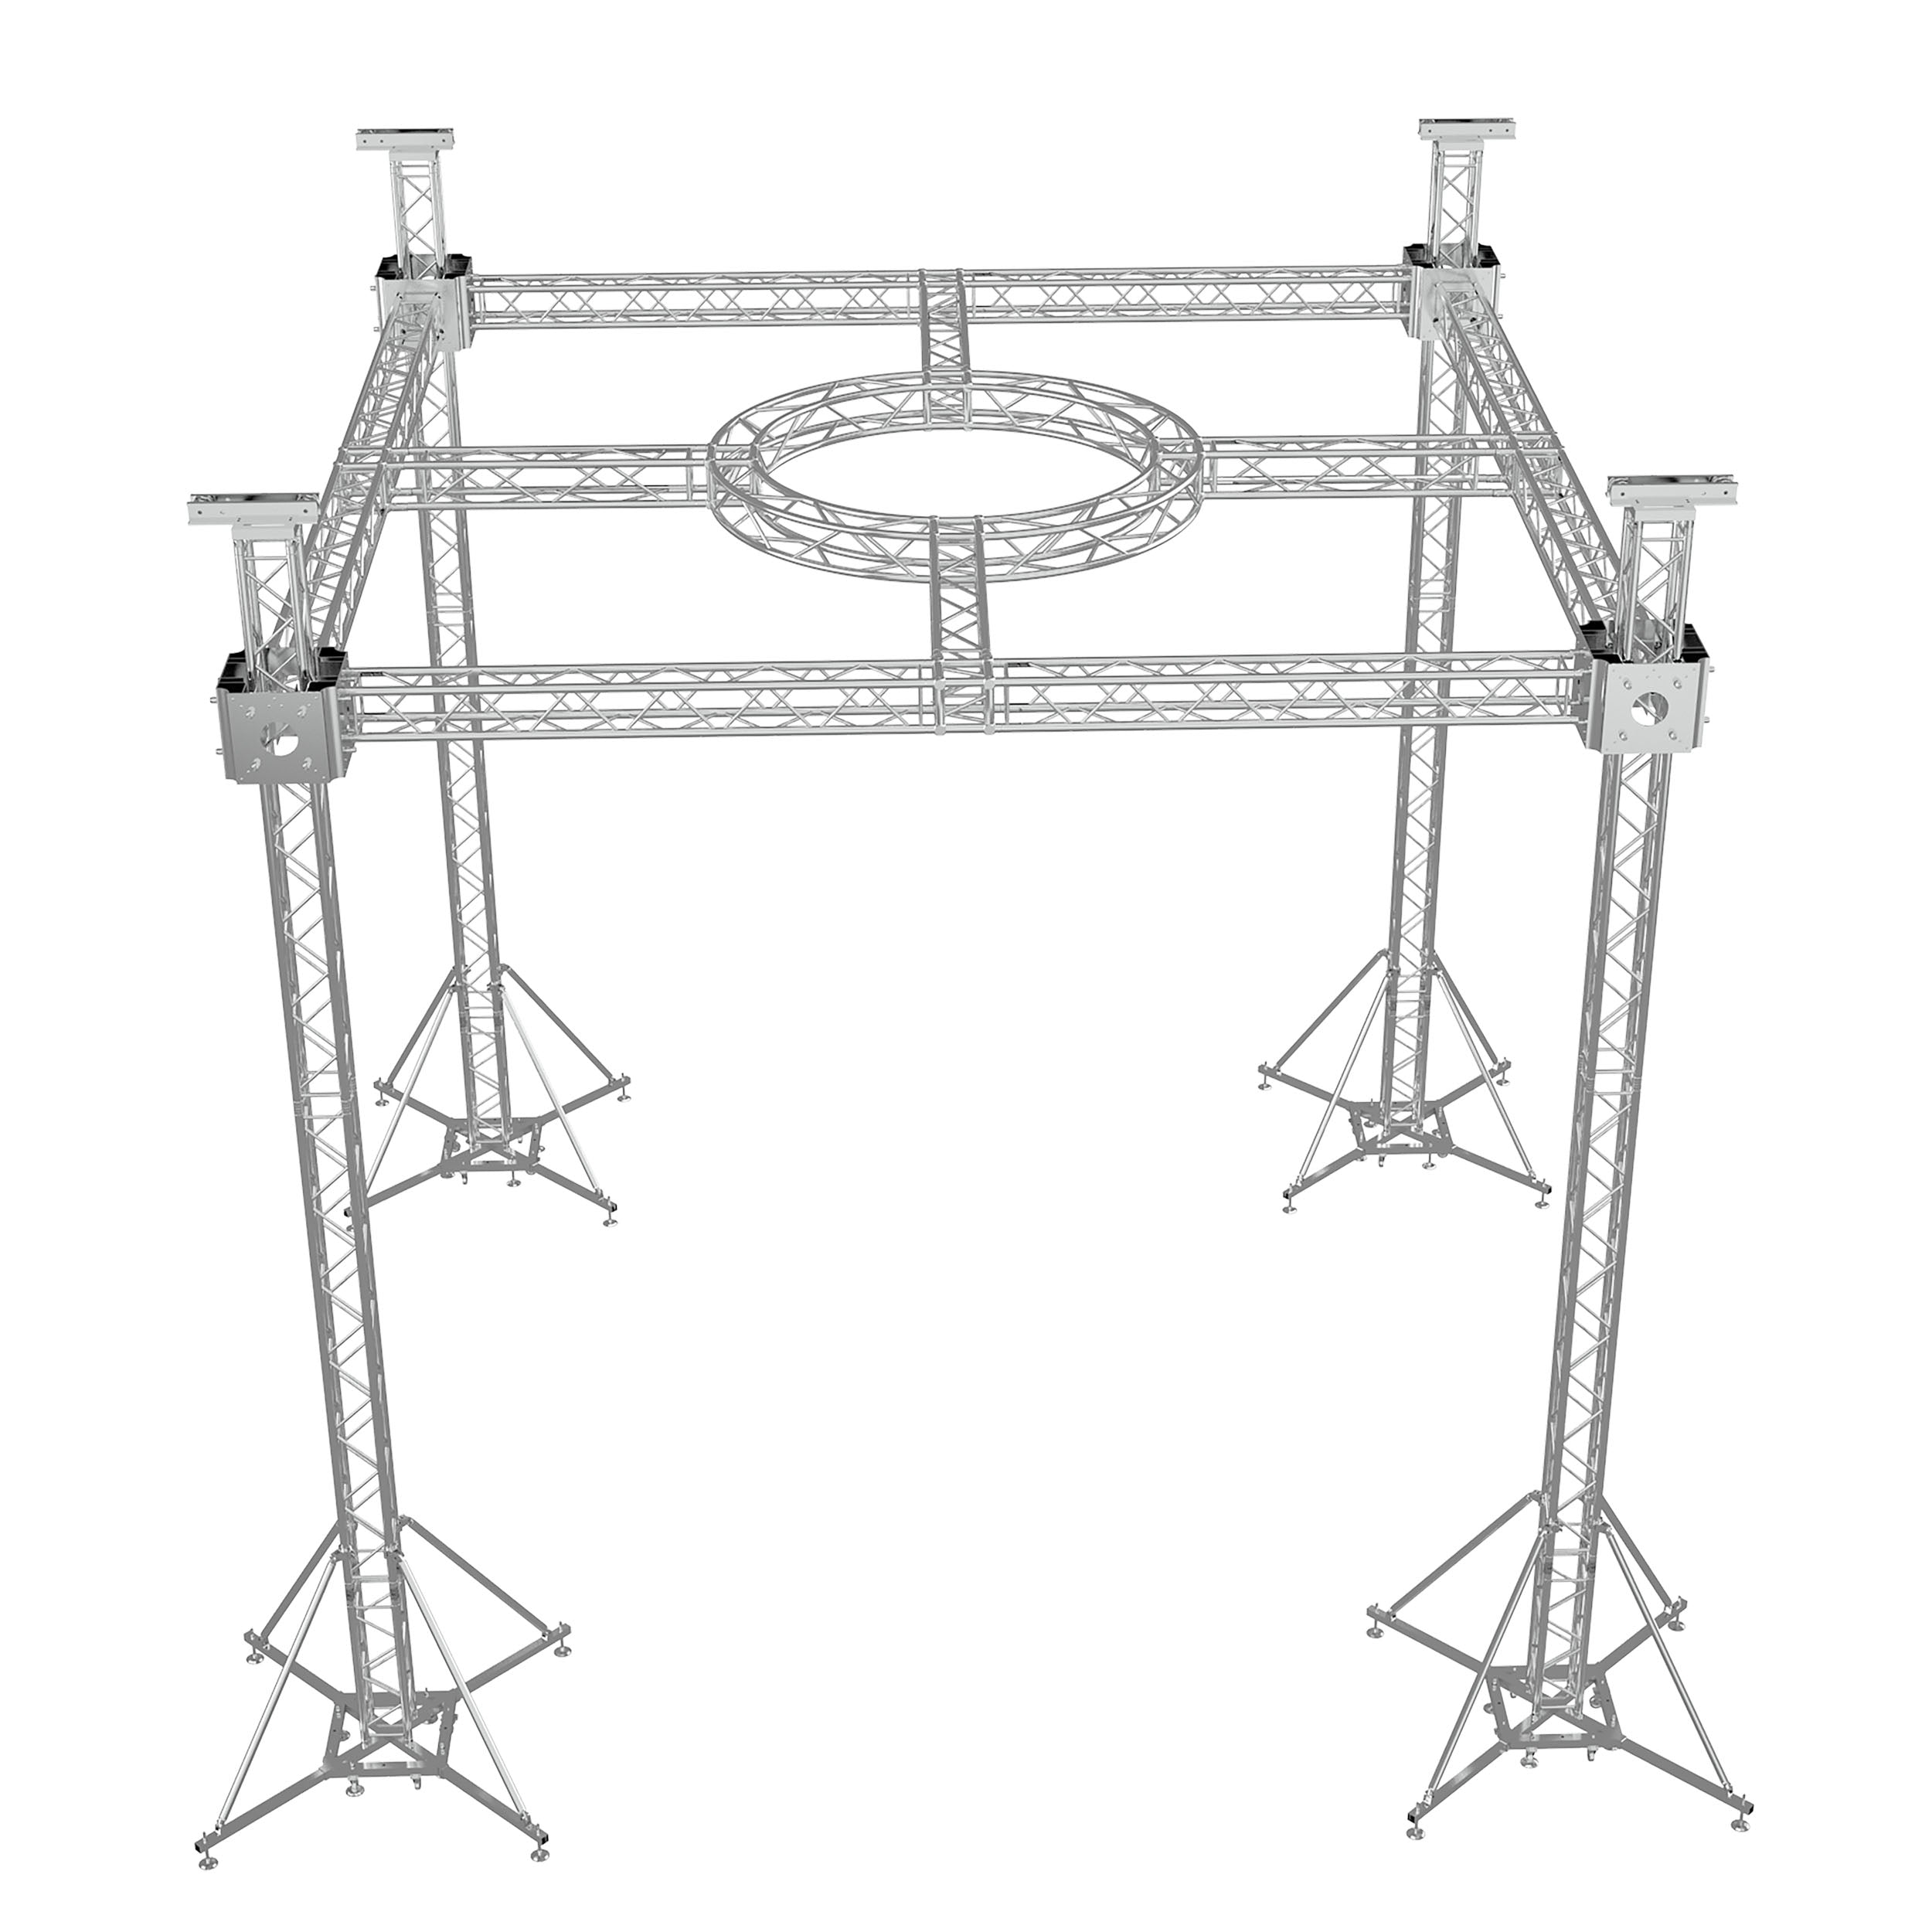 Pro X F34 Stage Roofing Truss System with Ground Support, Circular Truss and Chain Hoists – 21x21x23 Ft. Circle in Center XTP-GS212123-2MC